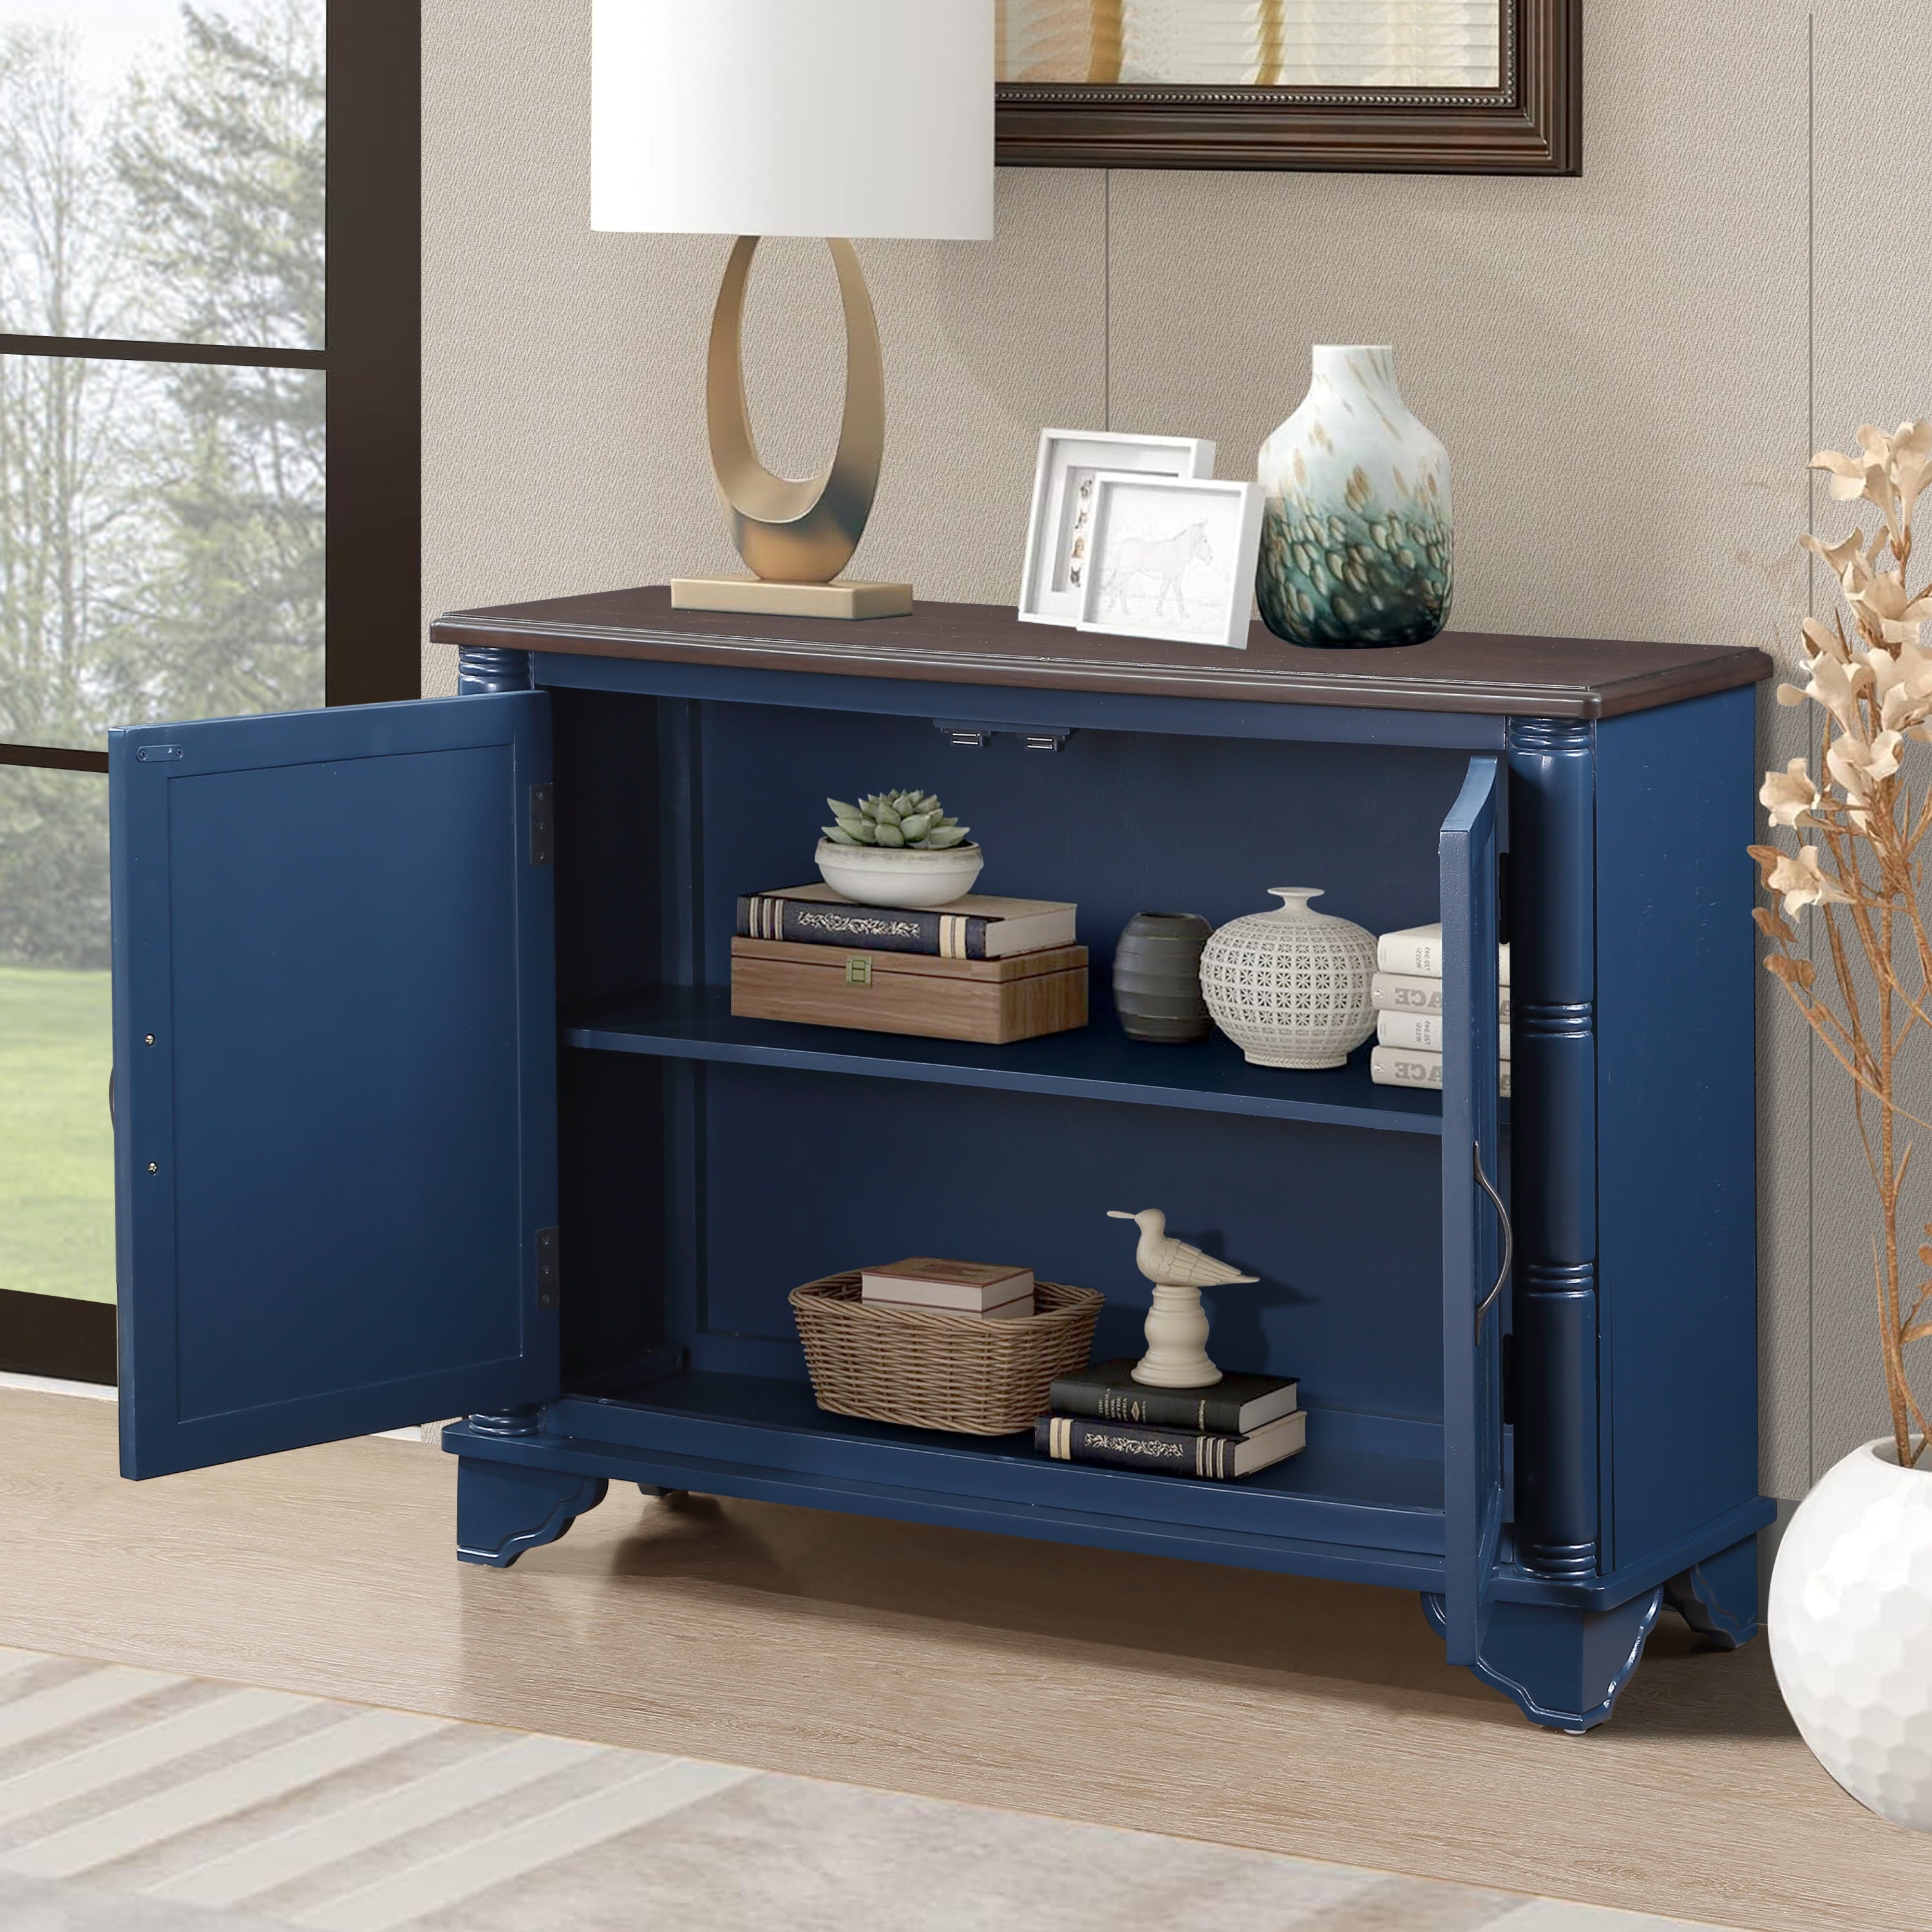 🆓🚛 40" Console Table With Storage Shelf, Retro Entryway Table With Adjustable Storage Shelf, Sofa Couch Table for Hallway, Entry Way, Living Room, Foyer, Navy Blue and Brown Top